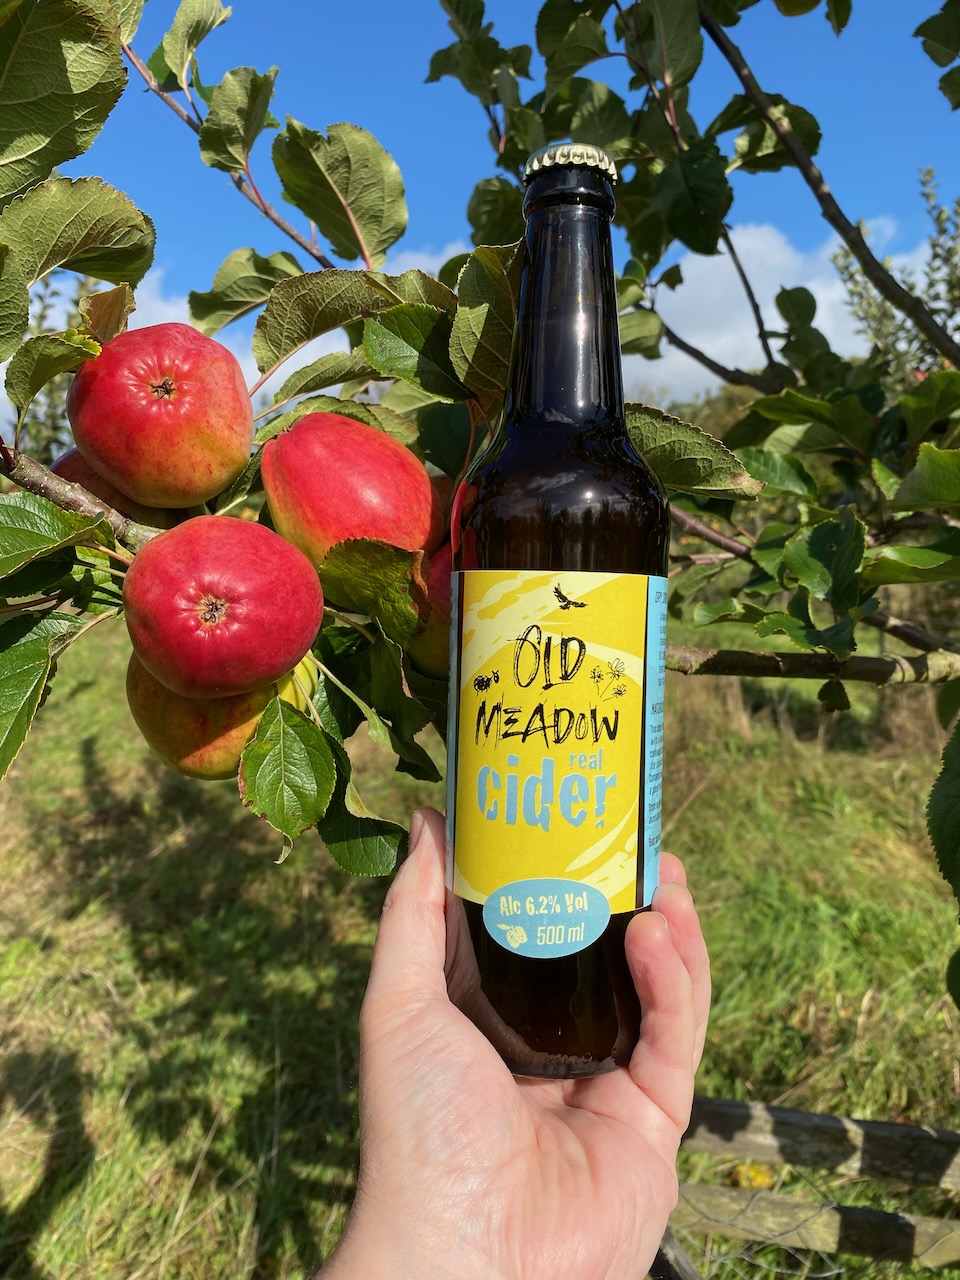 Bottle of Old Meadow Cider next to fruiting apple tree